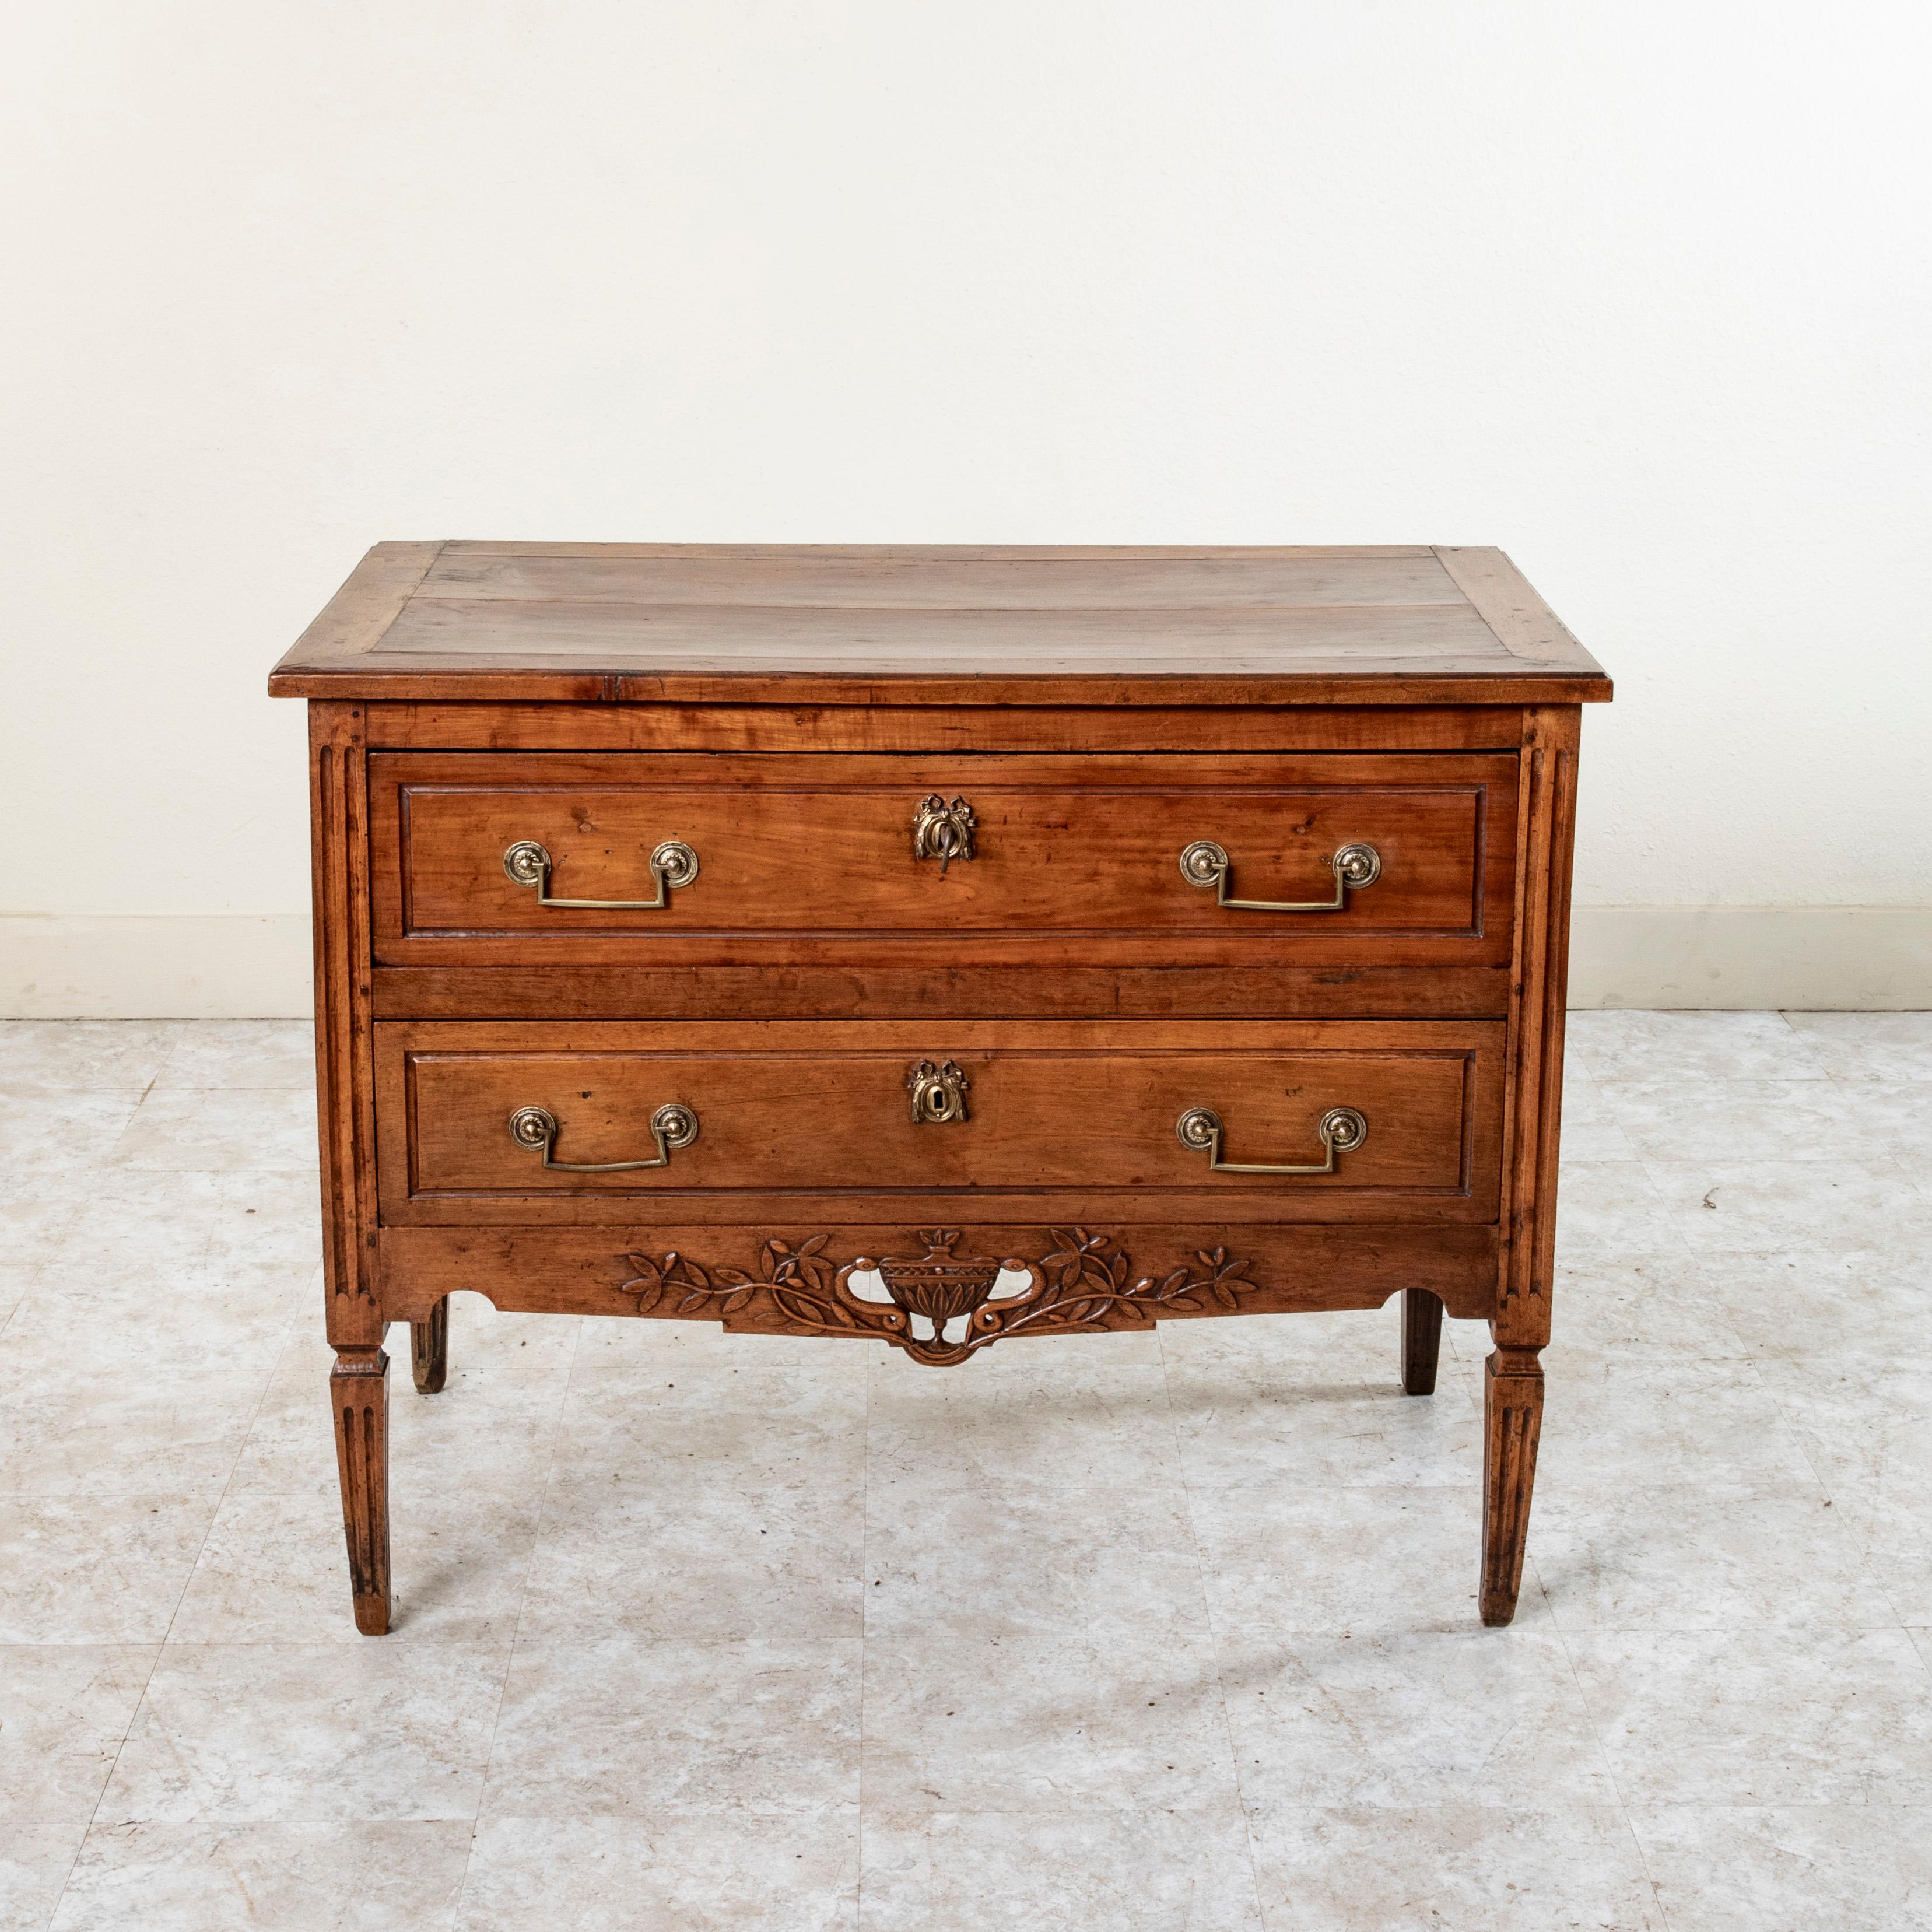 Found in the region of Languedoc in the south of France, this late eighteenth century Louis XVI period commode or chest of drawers is constructed of  walnut, cherry wood, and chestnut. With a hand pegged top and paneled sides, this piece features a